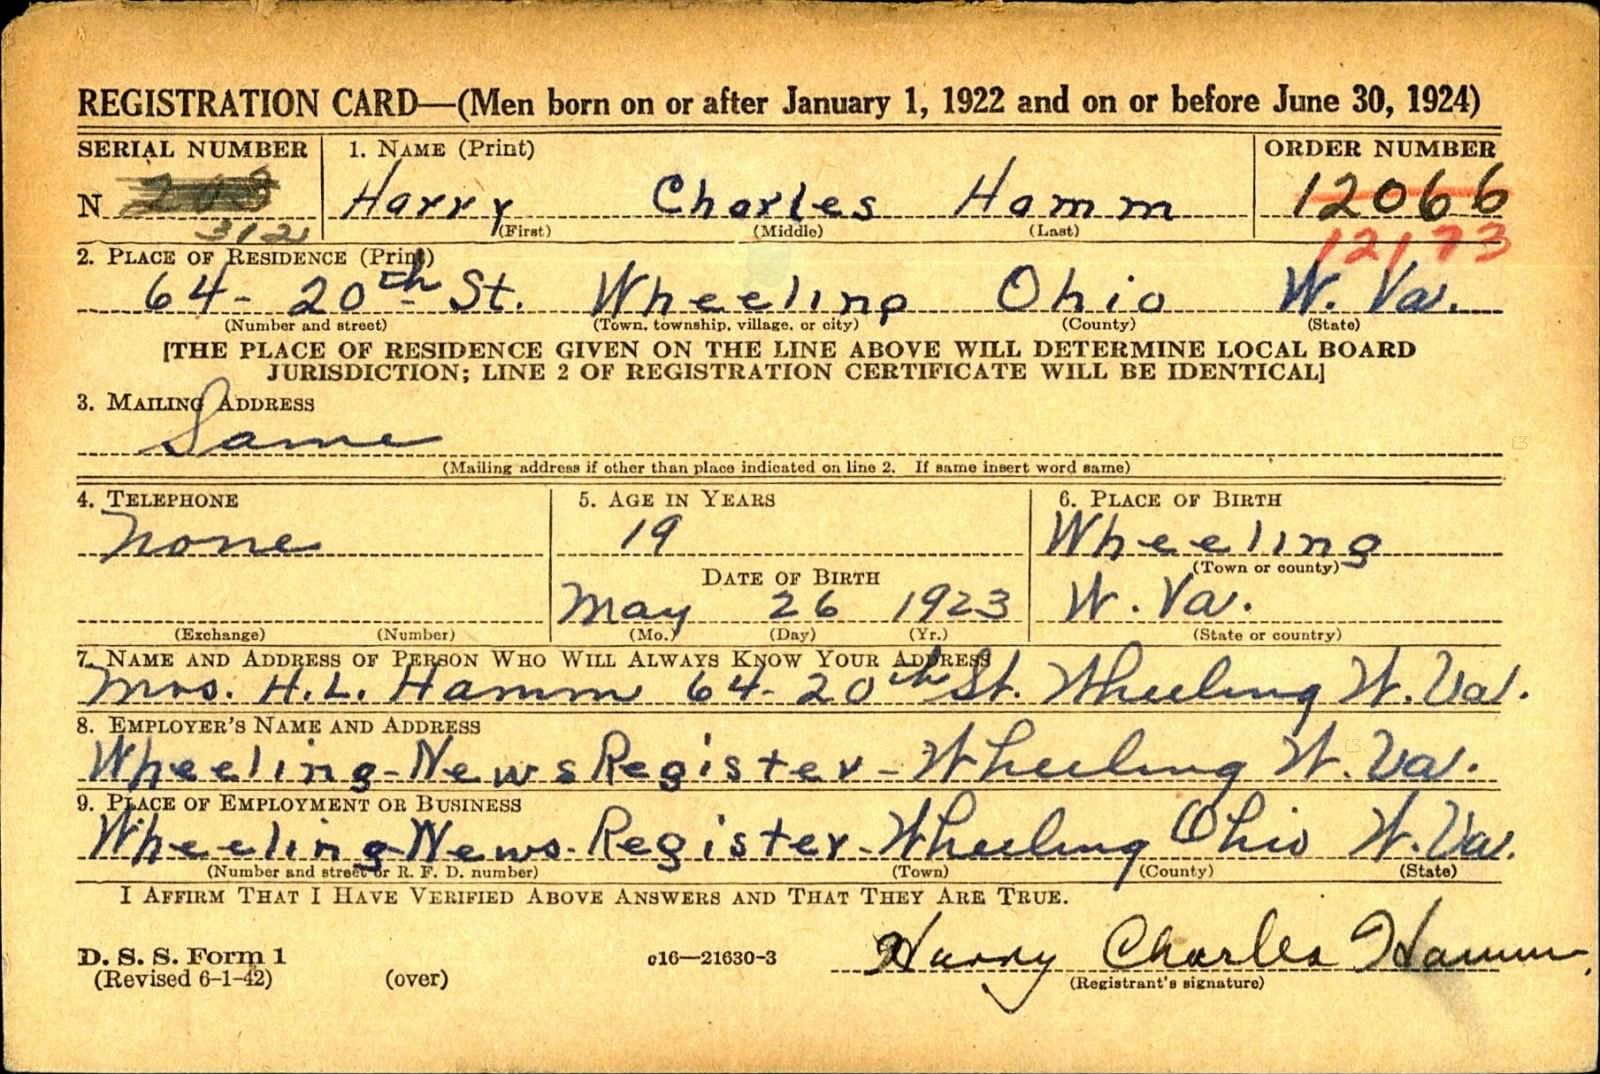 Military registration card for Harry Hamm.